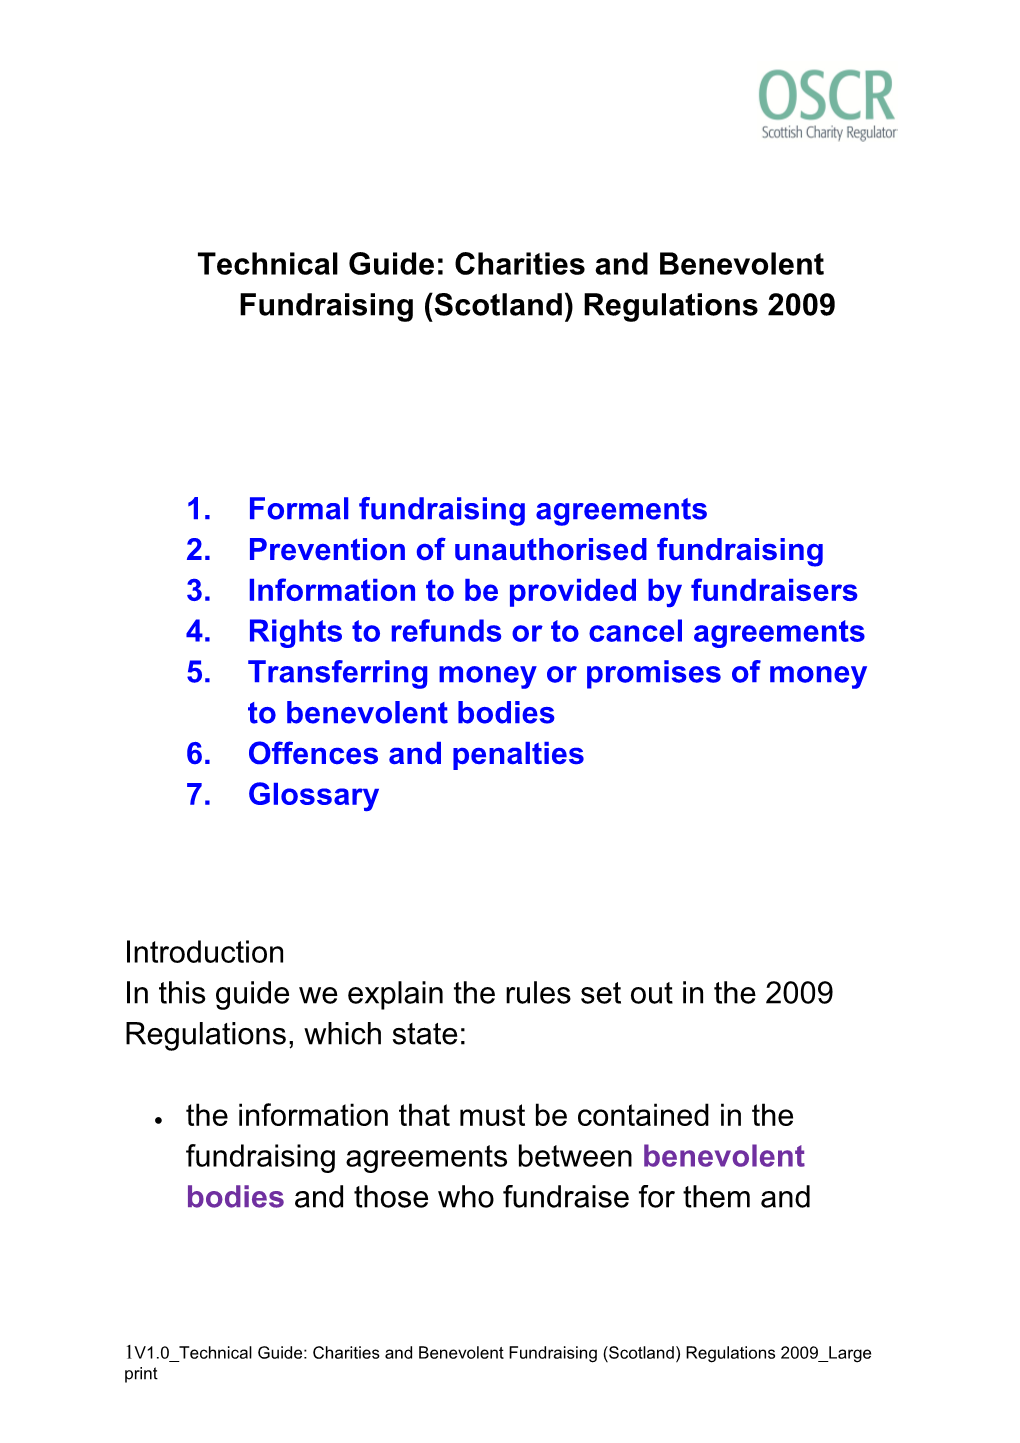 Technical Guide: Charities and Benevolent Fundraising (Scotland) Regulations 2009